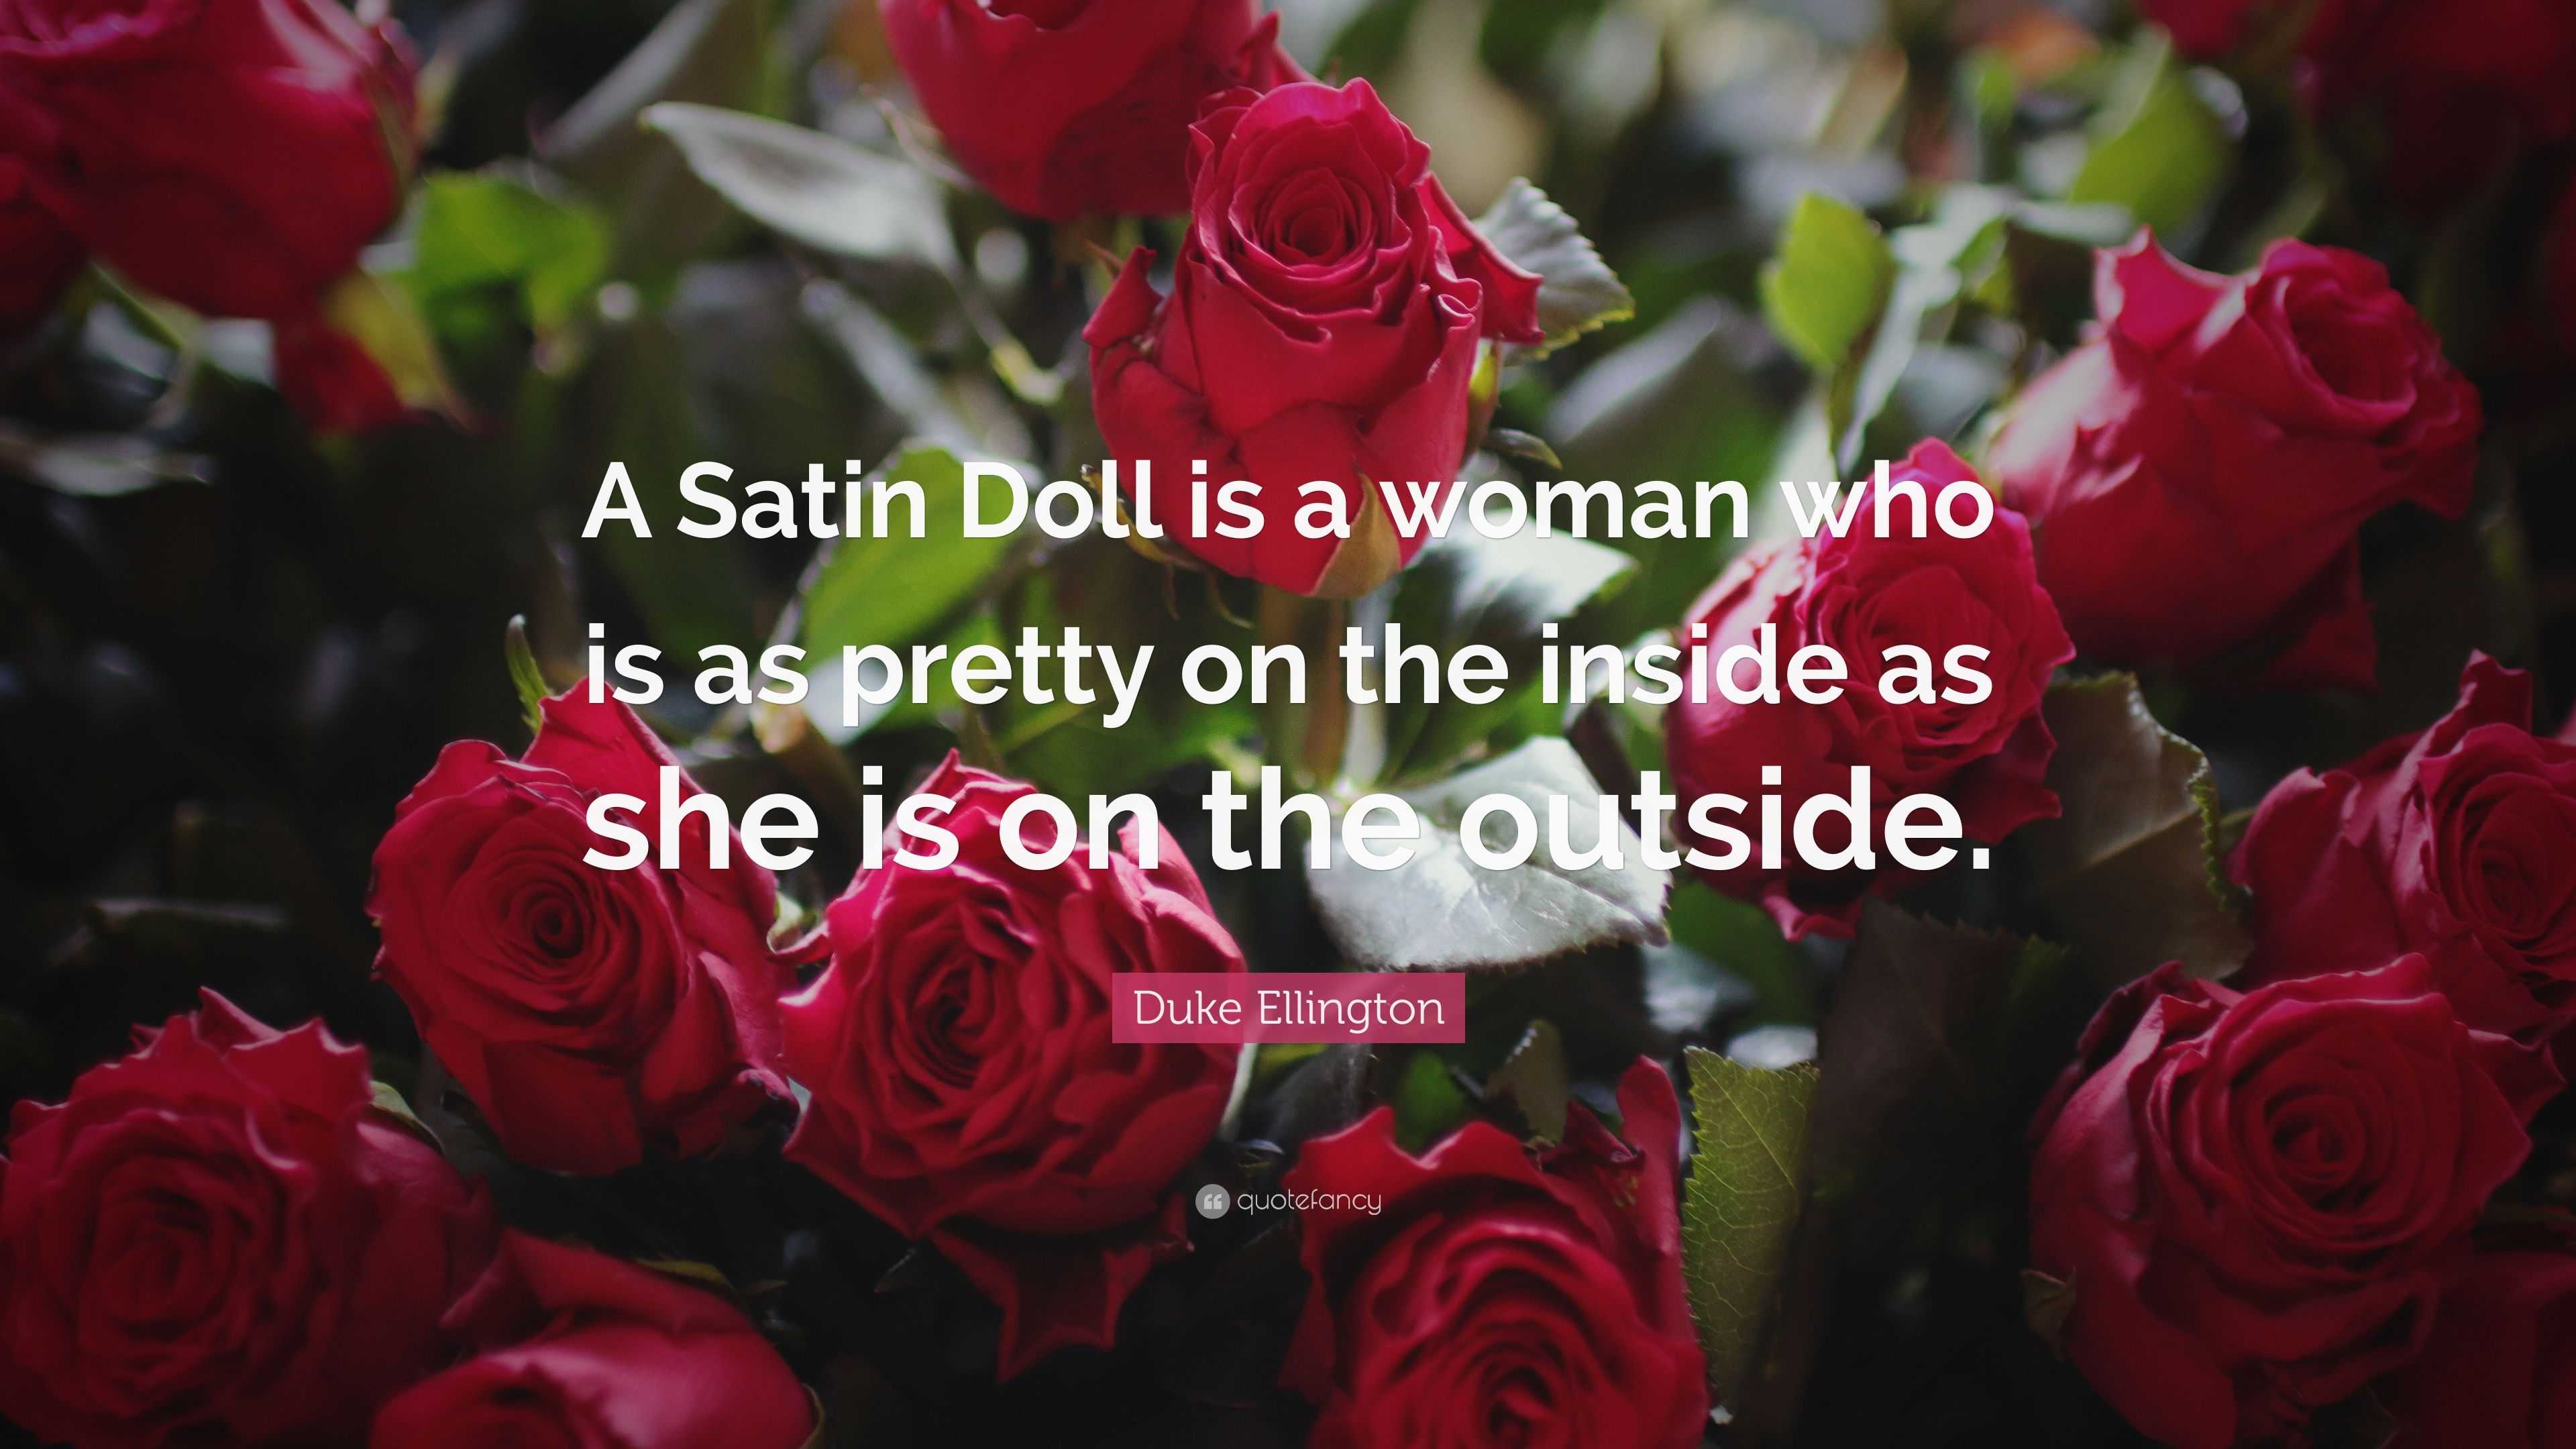 Duke Ellington Quote: “A Satin Doll is a woman who is as pretty on the ...